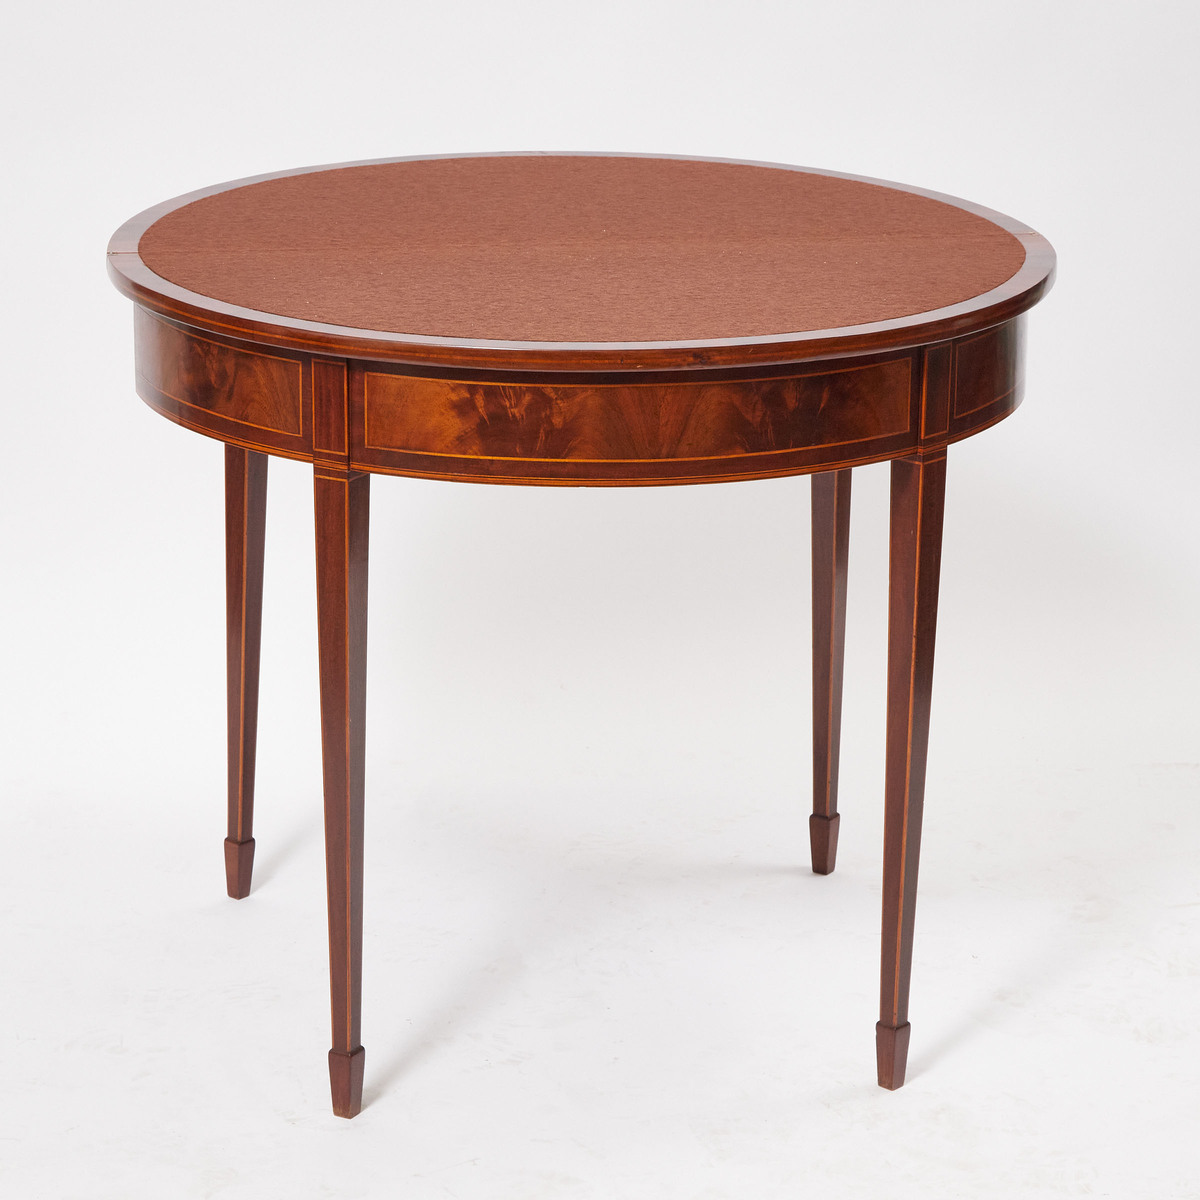 George III Style Satinwood Strung Flame Mahogany Demi-Lune Folding Card Table, 20th century, 30.5 x - Image 2 of 2